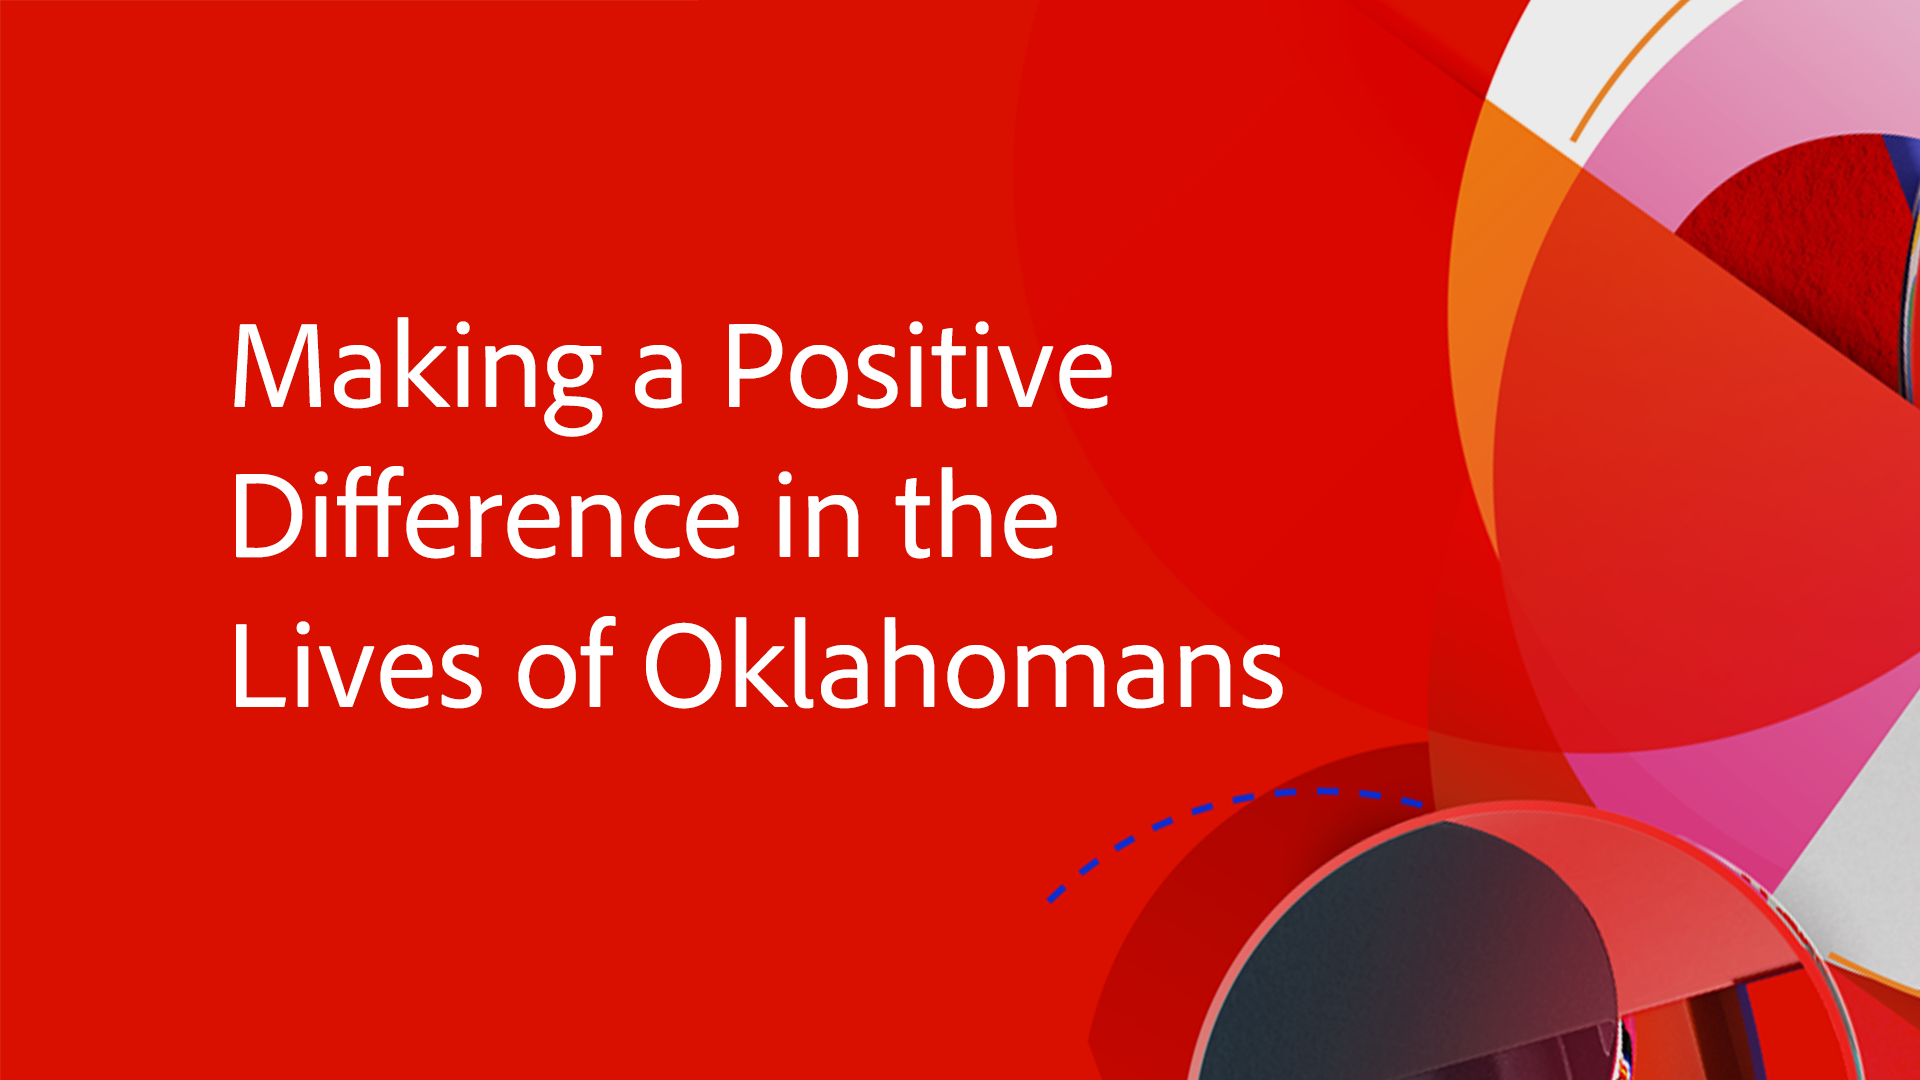 Making a Positive Difference in the Lives of Oklahomans